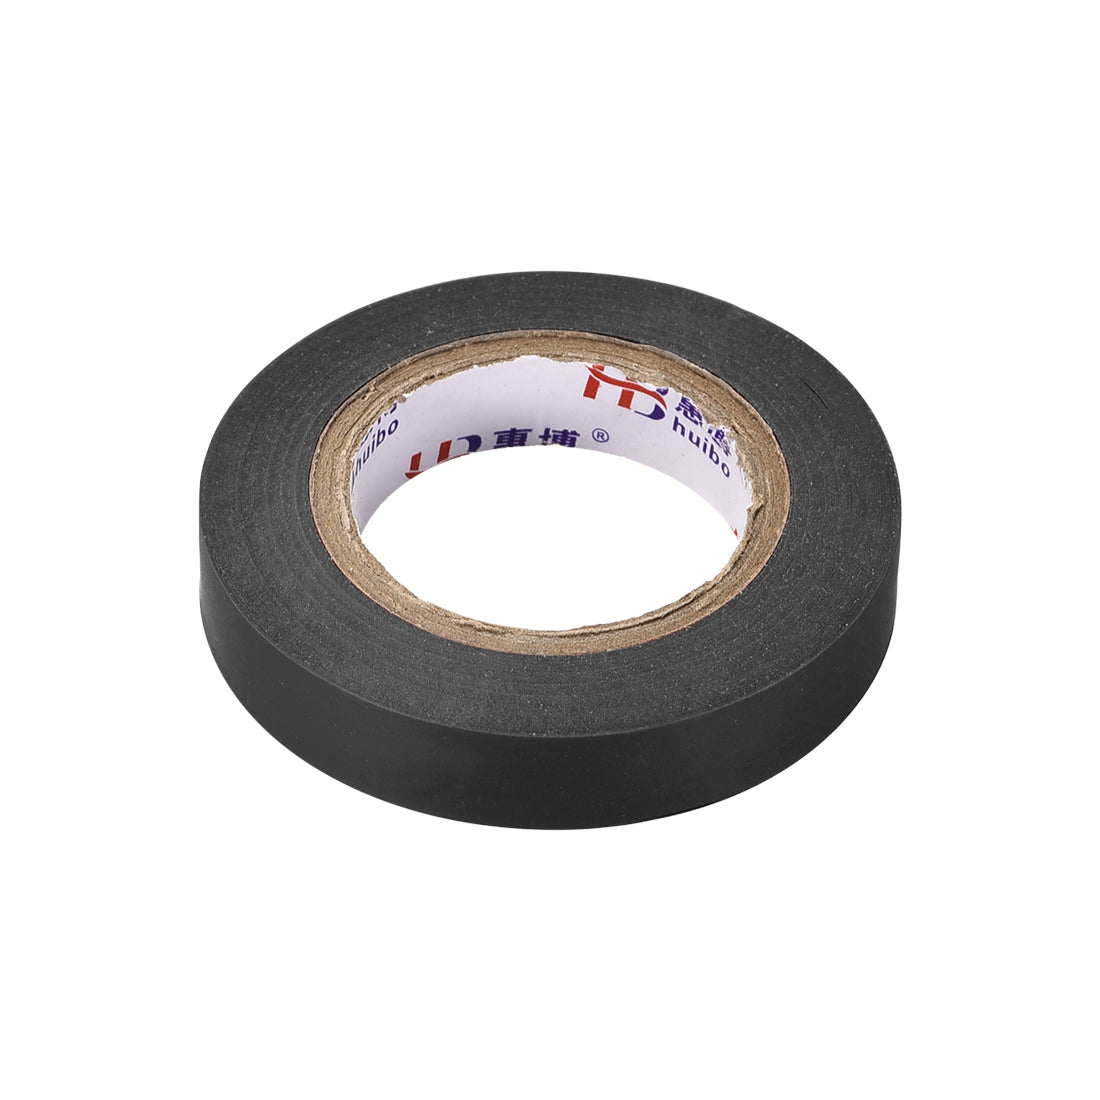 uxcell Uxcell Insulating Tape 12mm Width 14.5M Long 0.15mm Thick PVC Electrical Tape Rated for Max. 400V  80C Use Black 2pcs